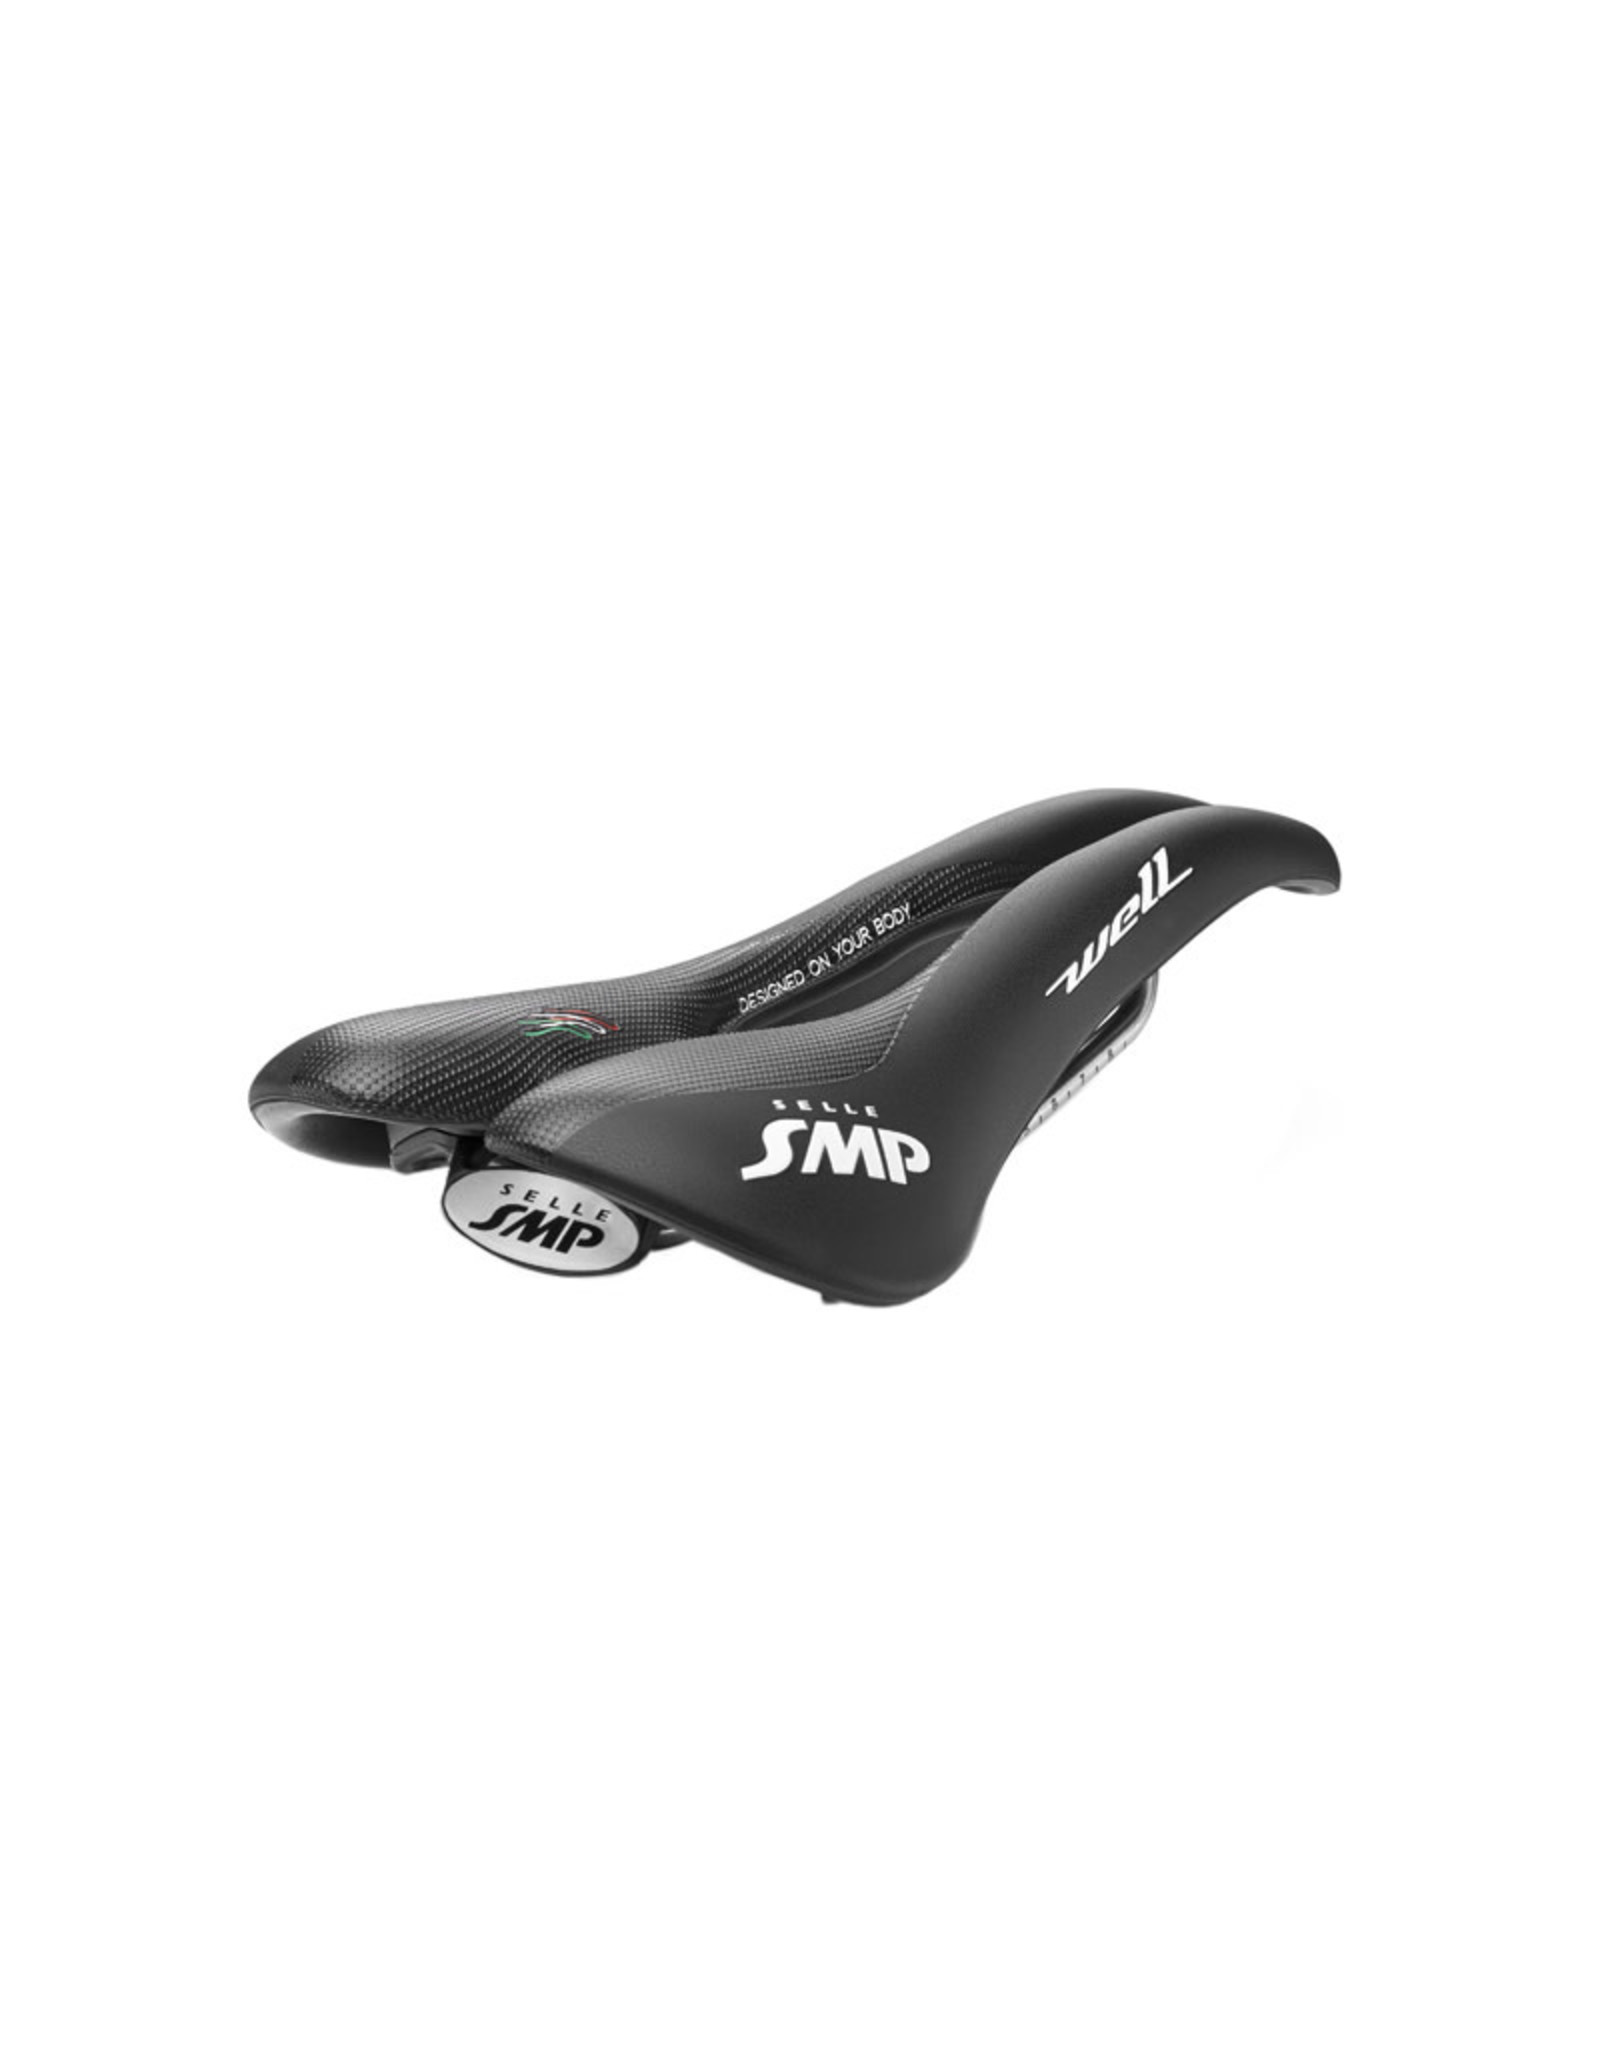 SMP Saddle SMP Well